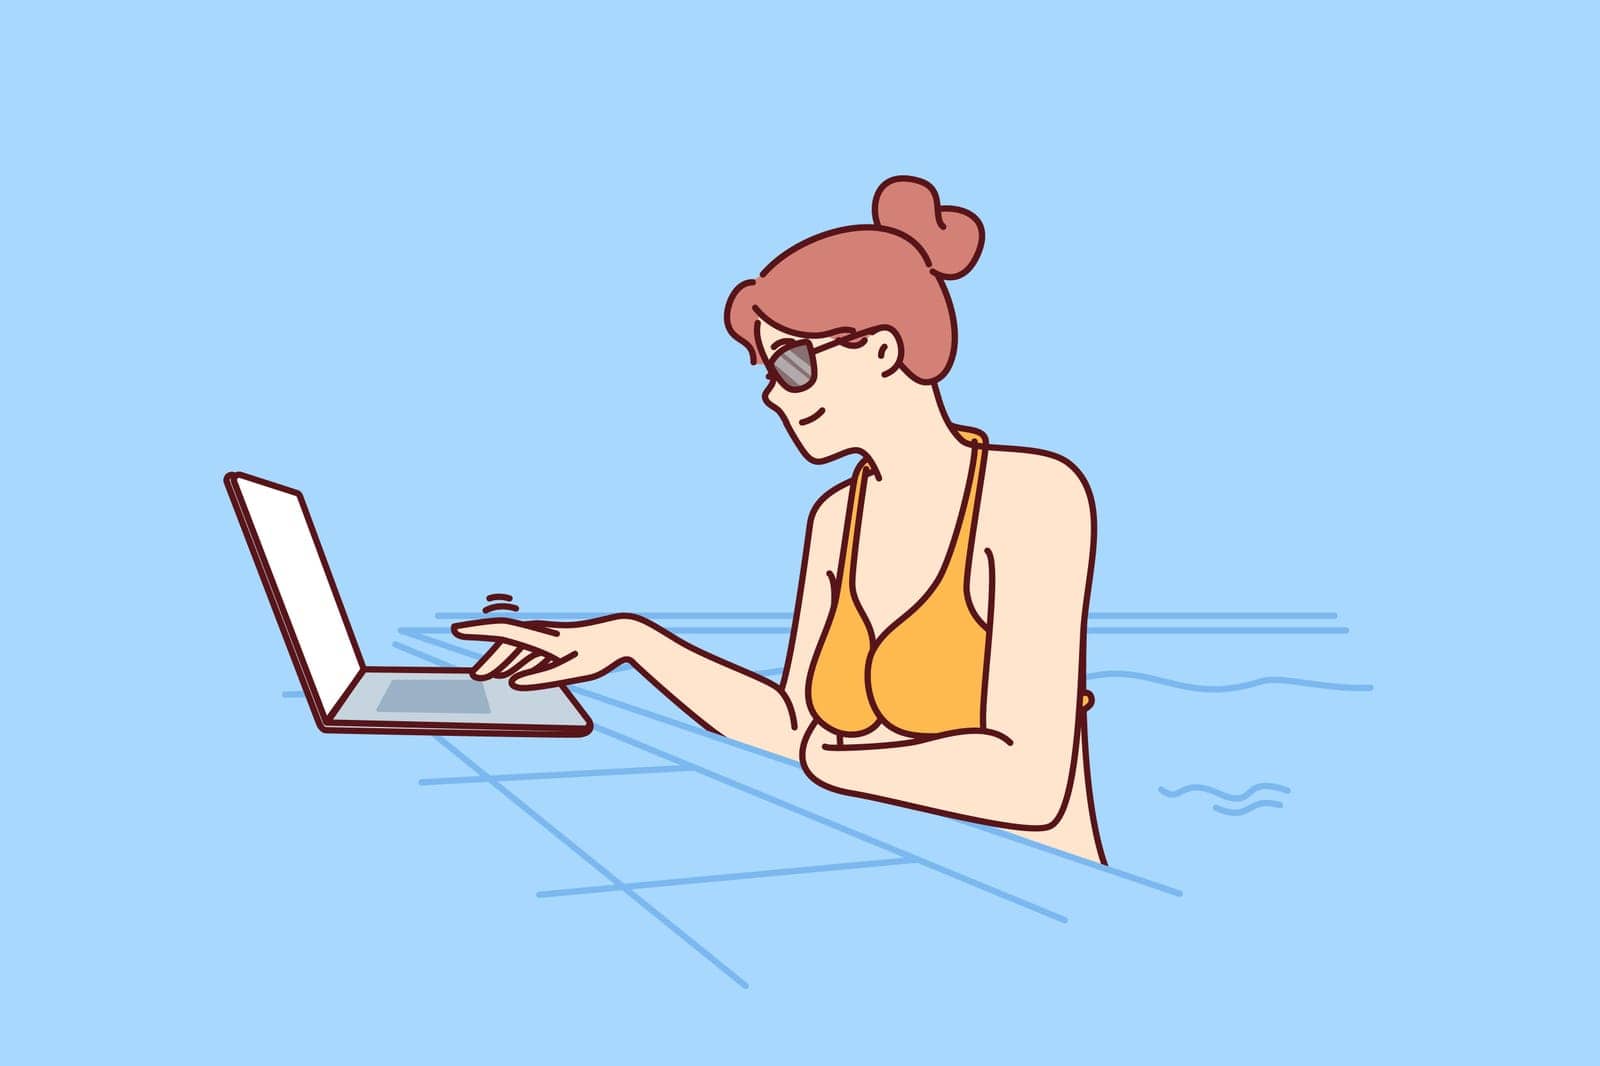 Woman freelancer is swimming in pool and using laptop while doing work over internet. Girl in bikini is using computer while working as freelancer and relaxing on vacation at same time.